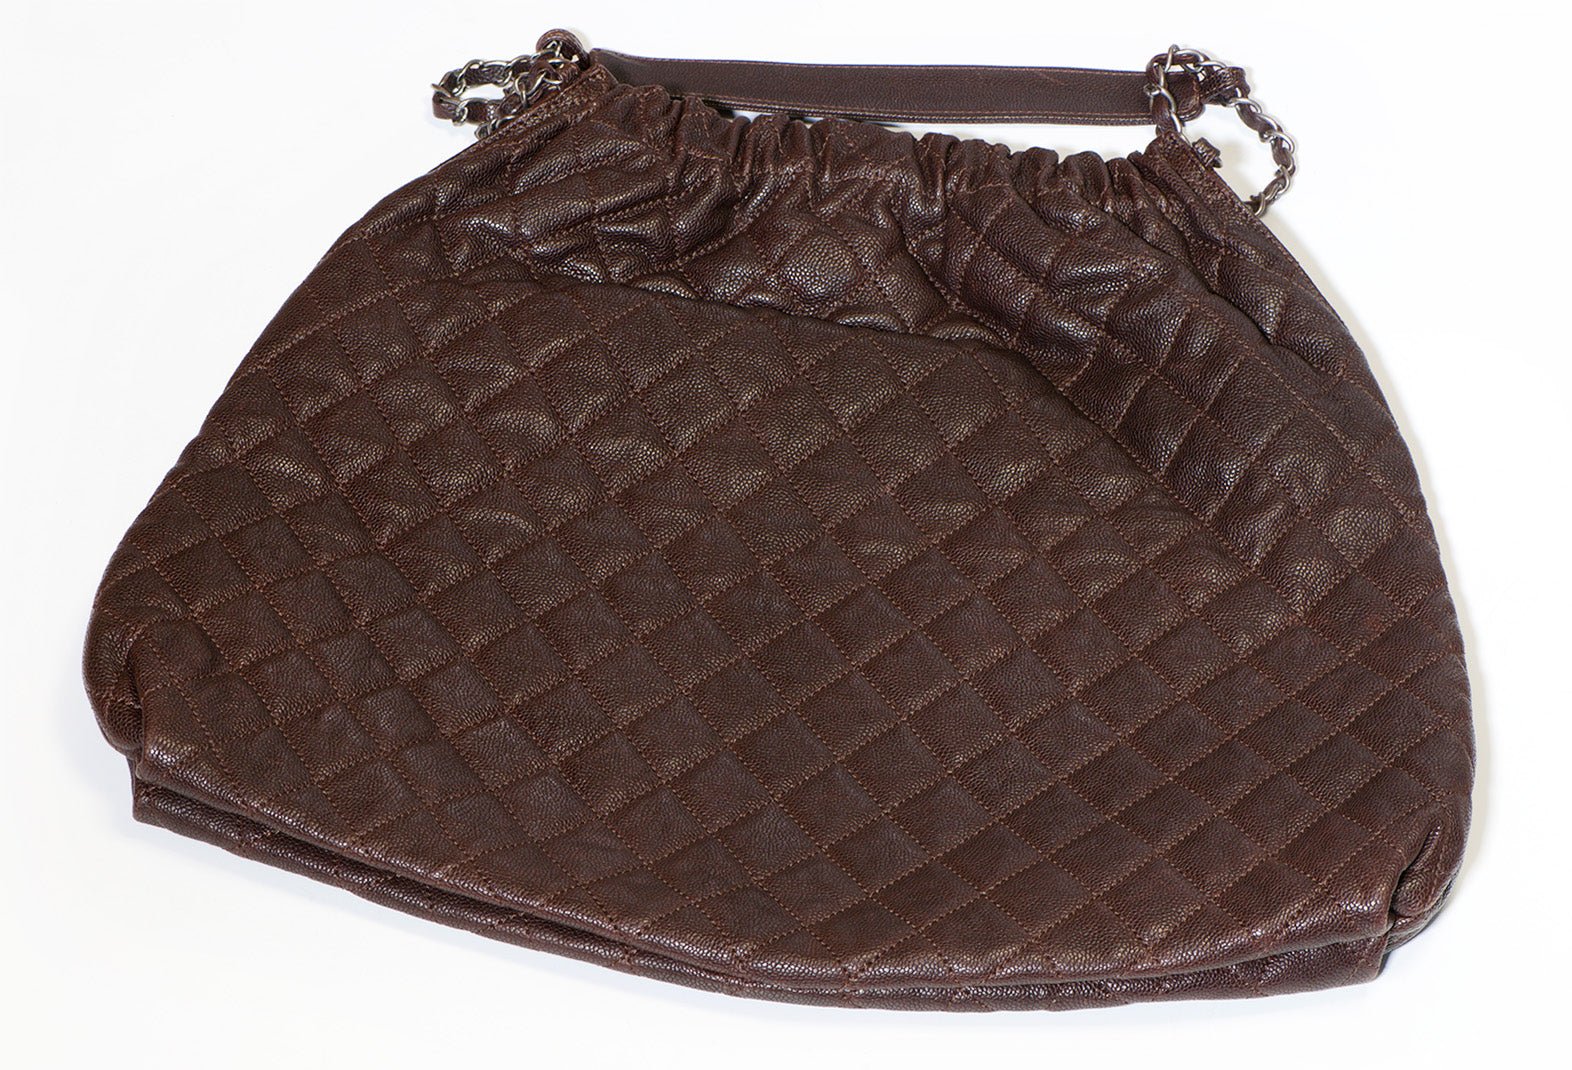 Chanel Paris CC Brown Caviar Quilted Leather Large Hobo Shoulder Bag